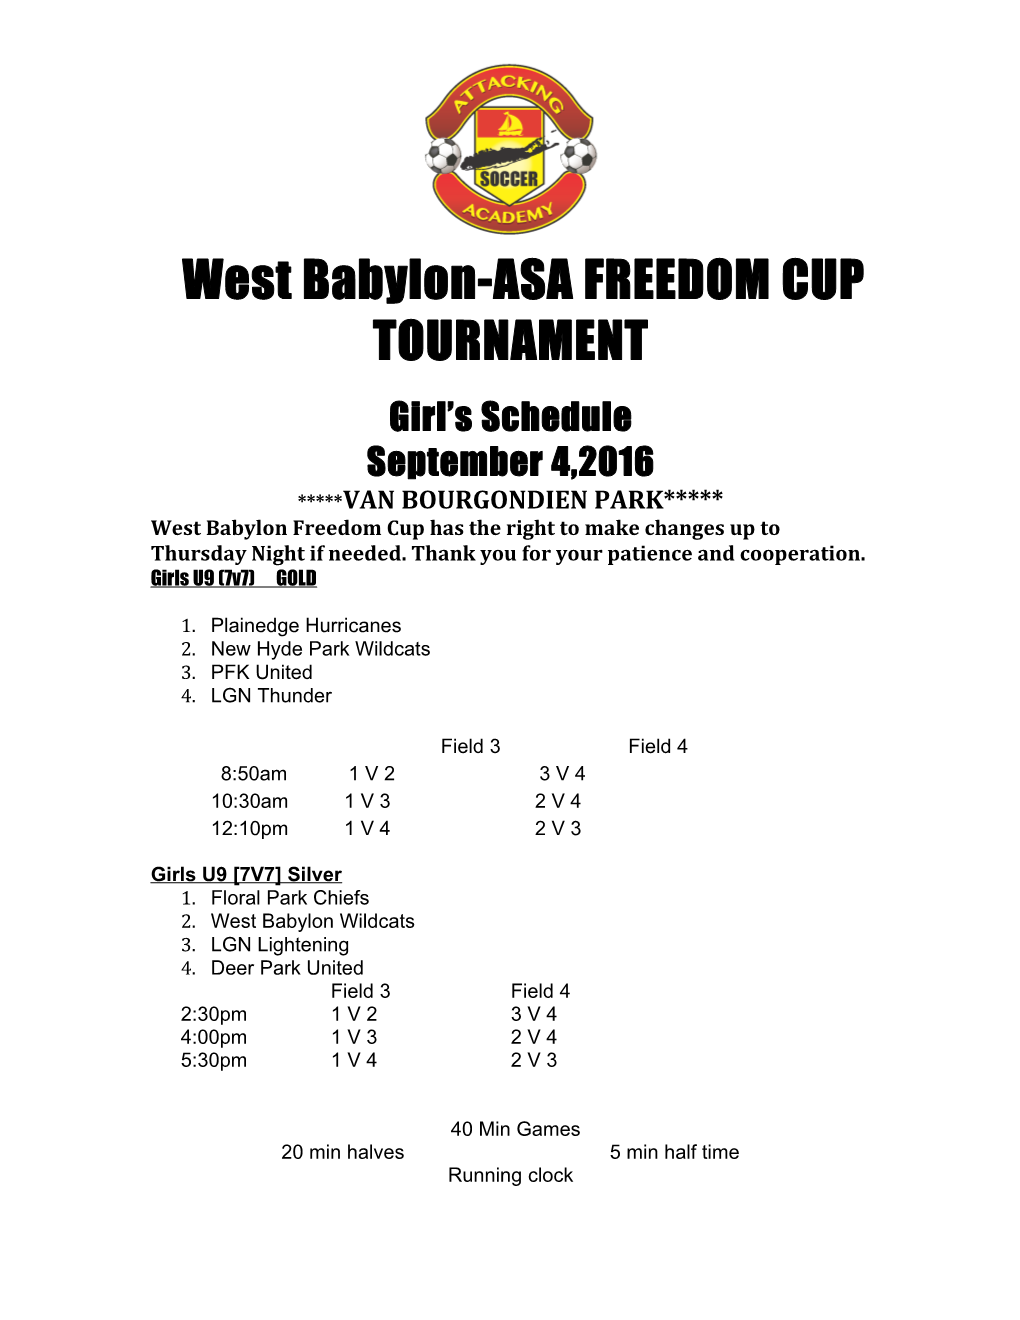 West Babylon-ASA FREEDOM CUP TOURNAMENT